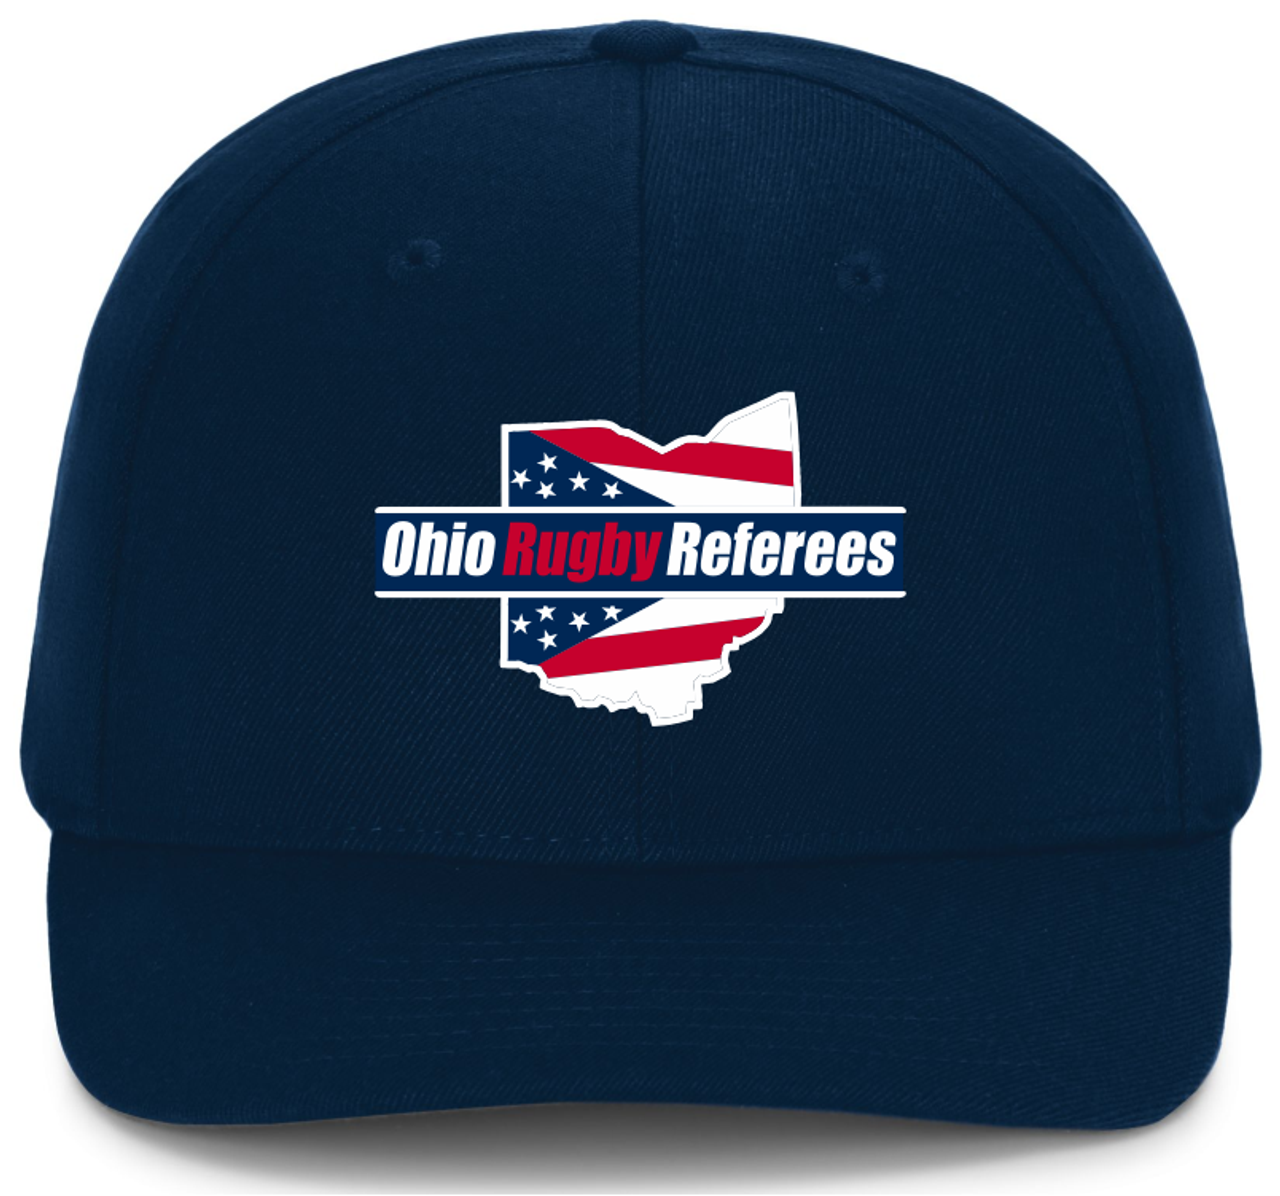 Ohio Rugby Referees Flexfit Hat, Navy